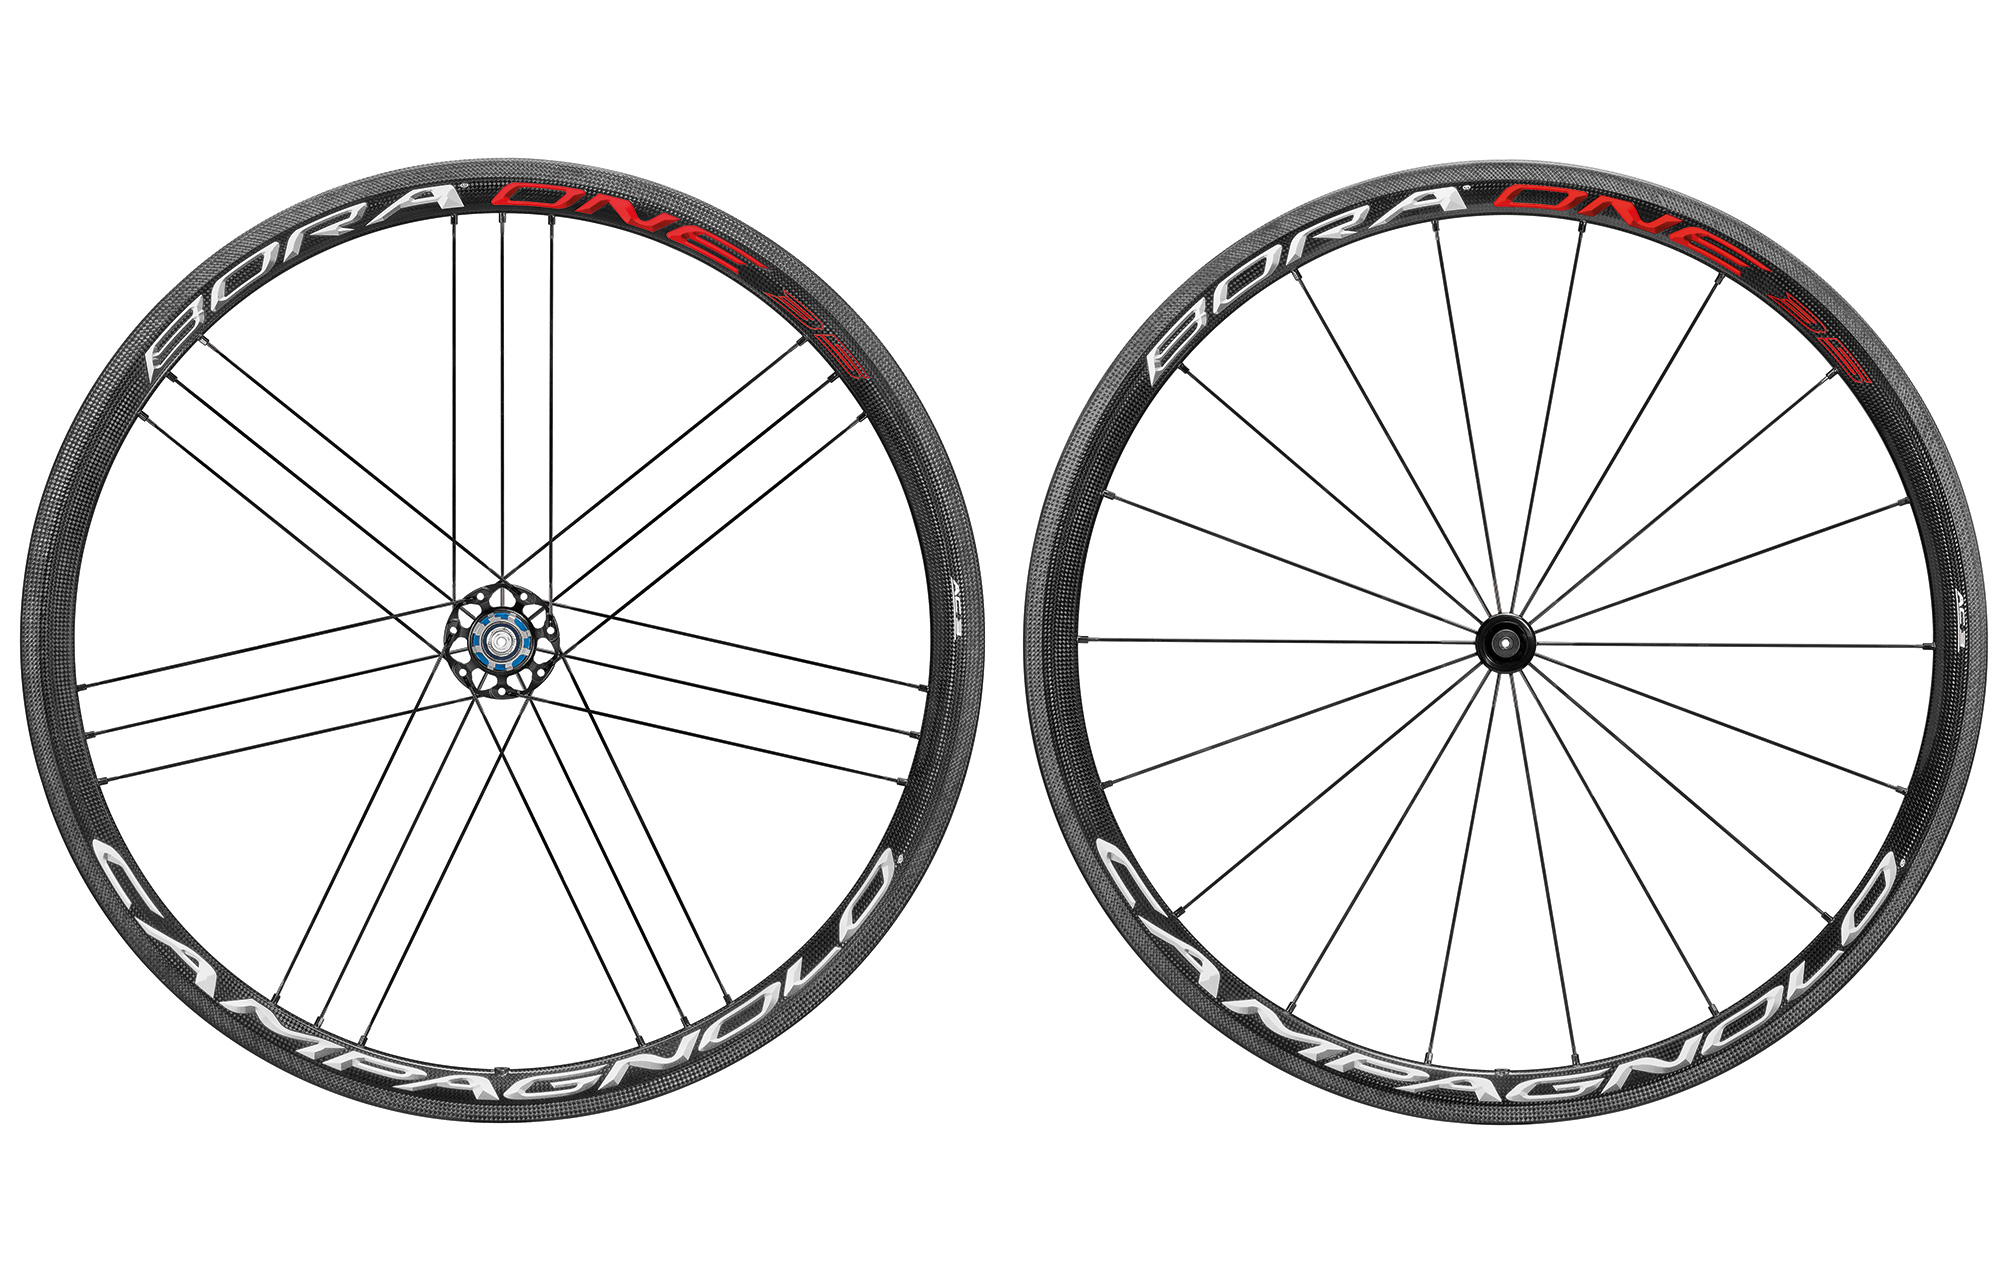 Details about   CAMPAGNOLO BORA ONE 35 RED & WHITE 3D DESIGN REPLACE RIM DECAL SET FOR 2 RIMS 